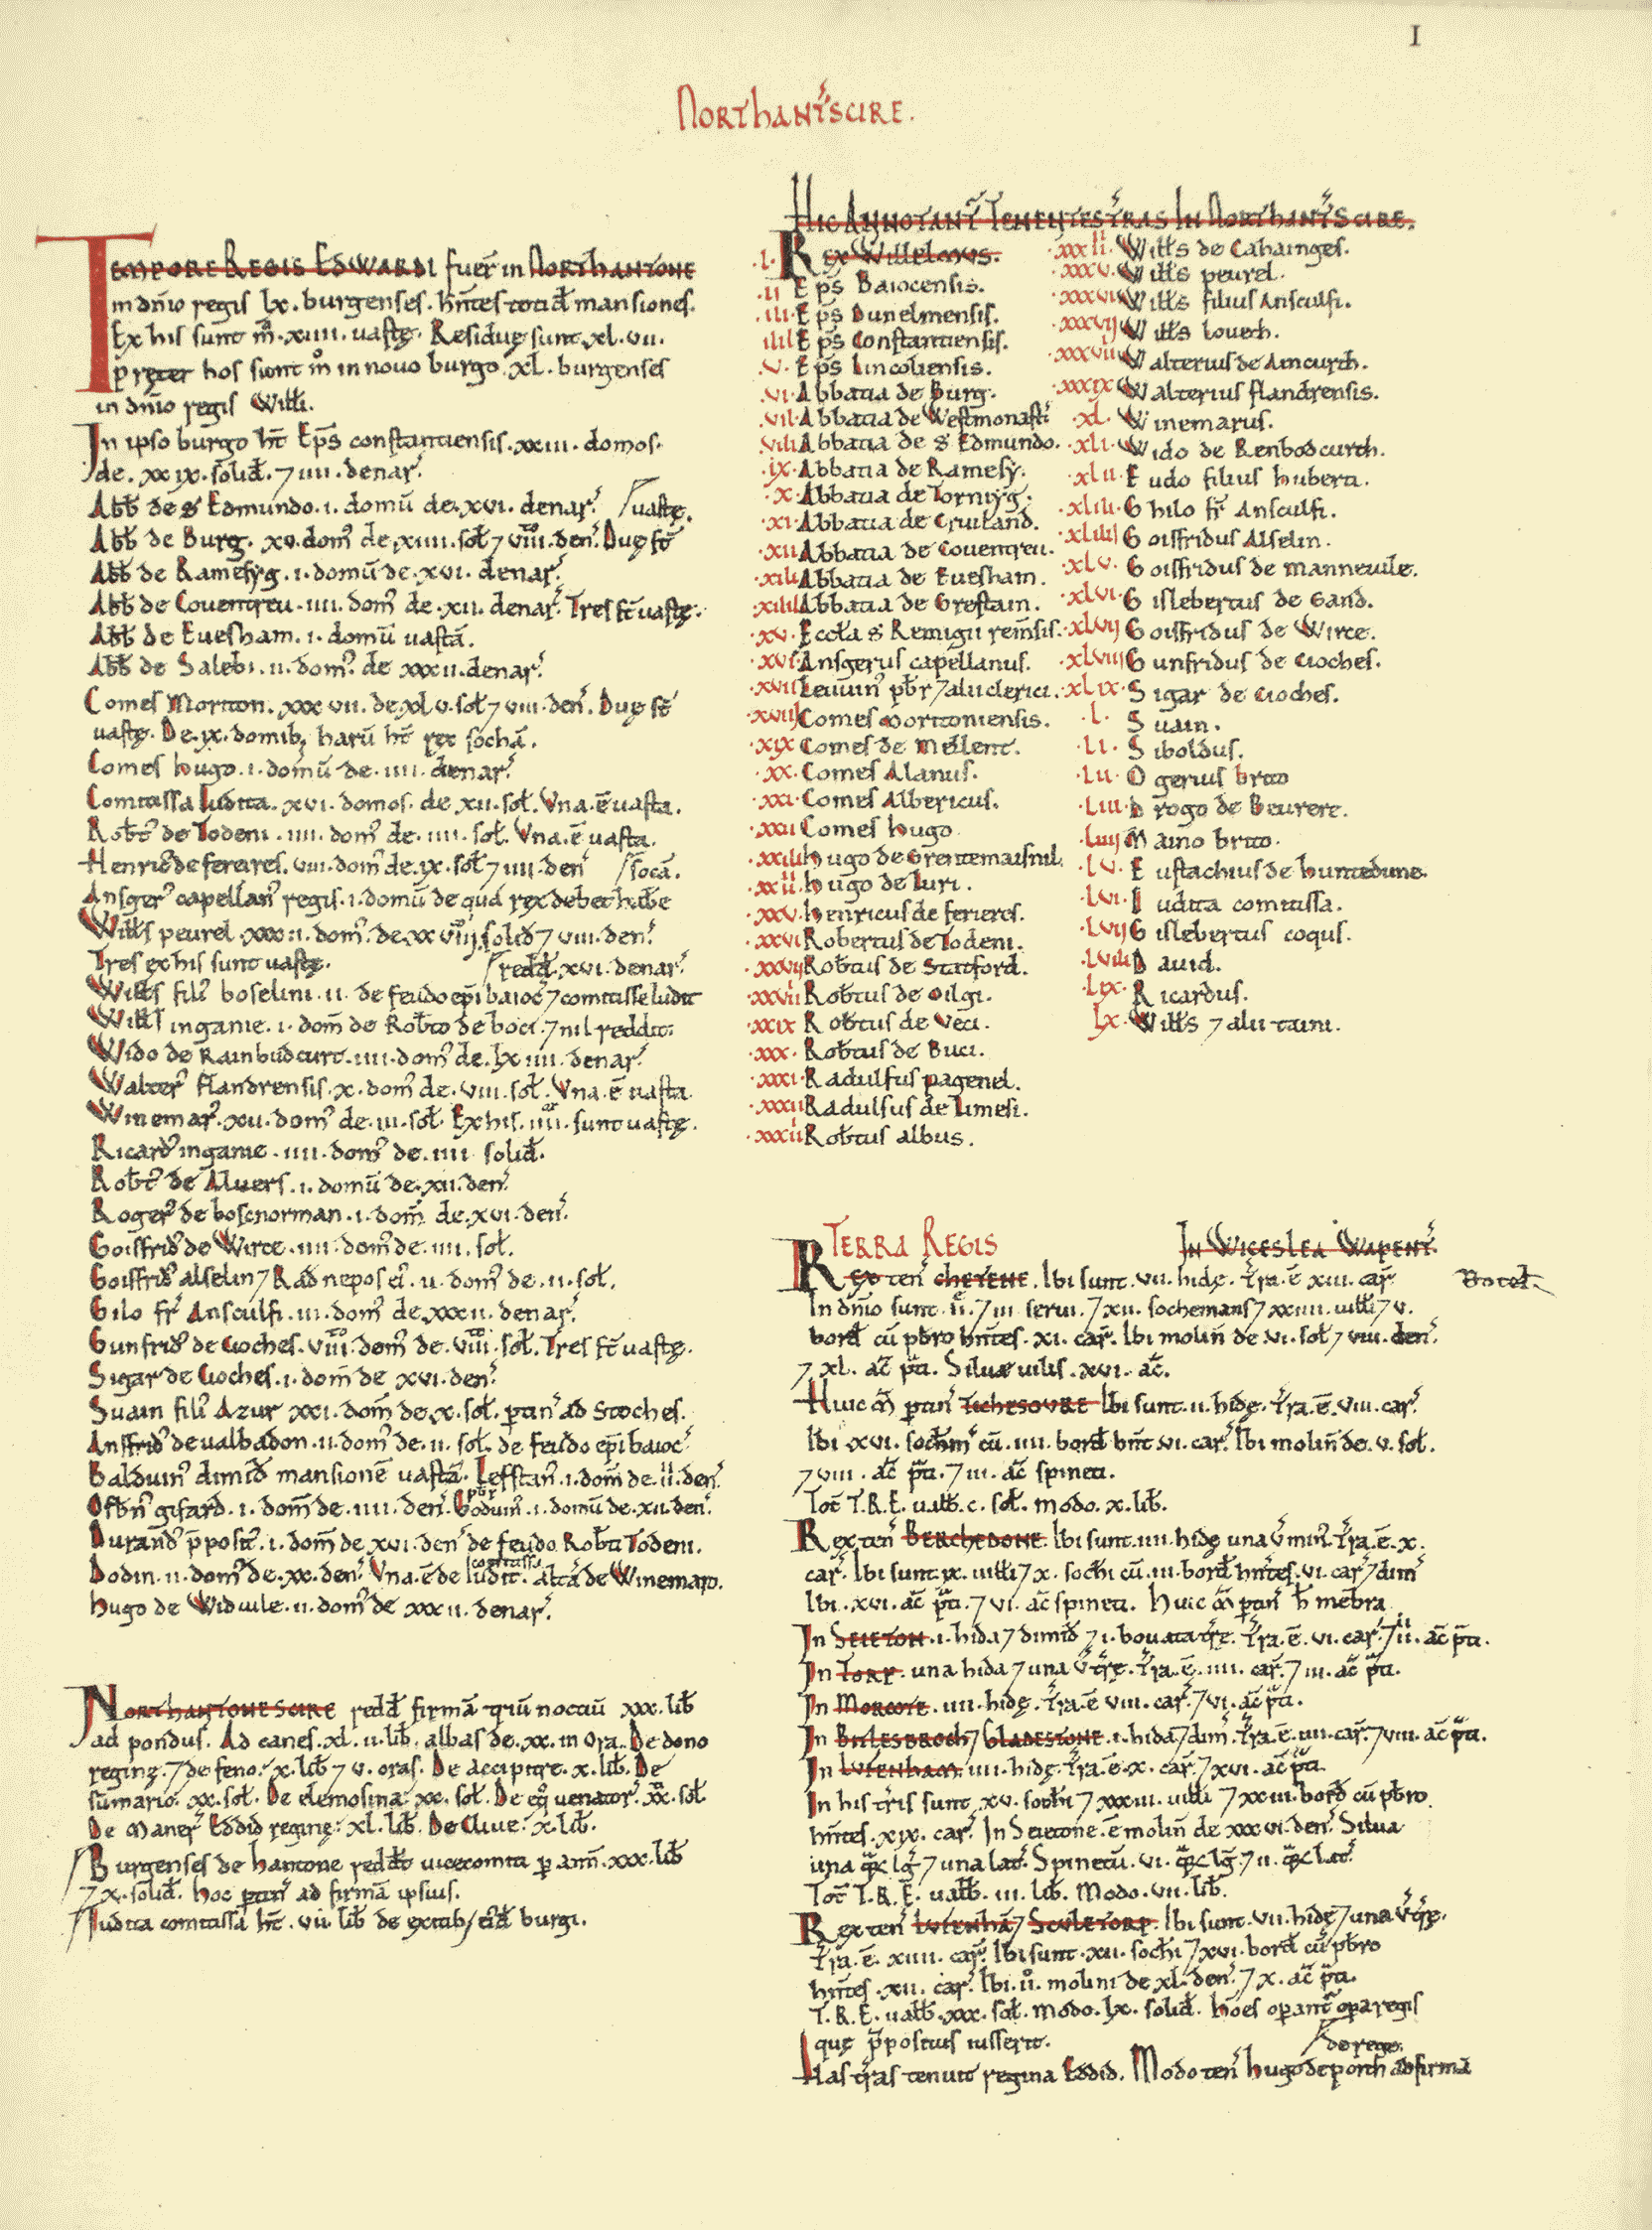 Original Folio of the Domesday Book, Northamptonshire page | from www.opendomesday.org